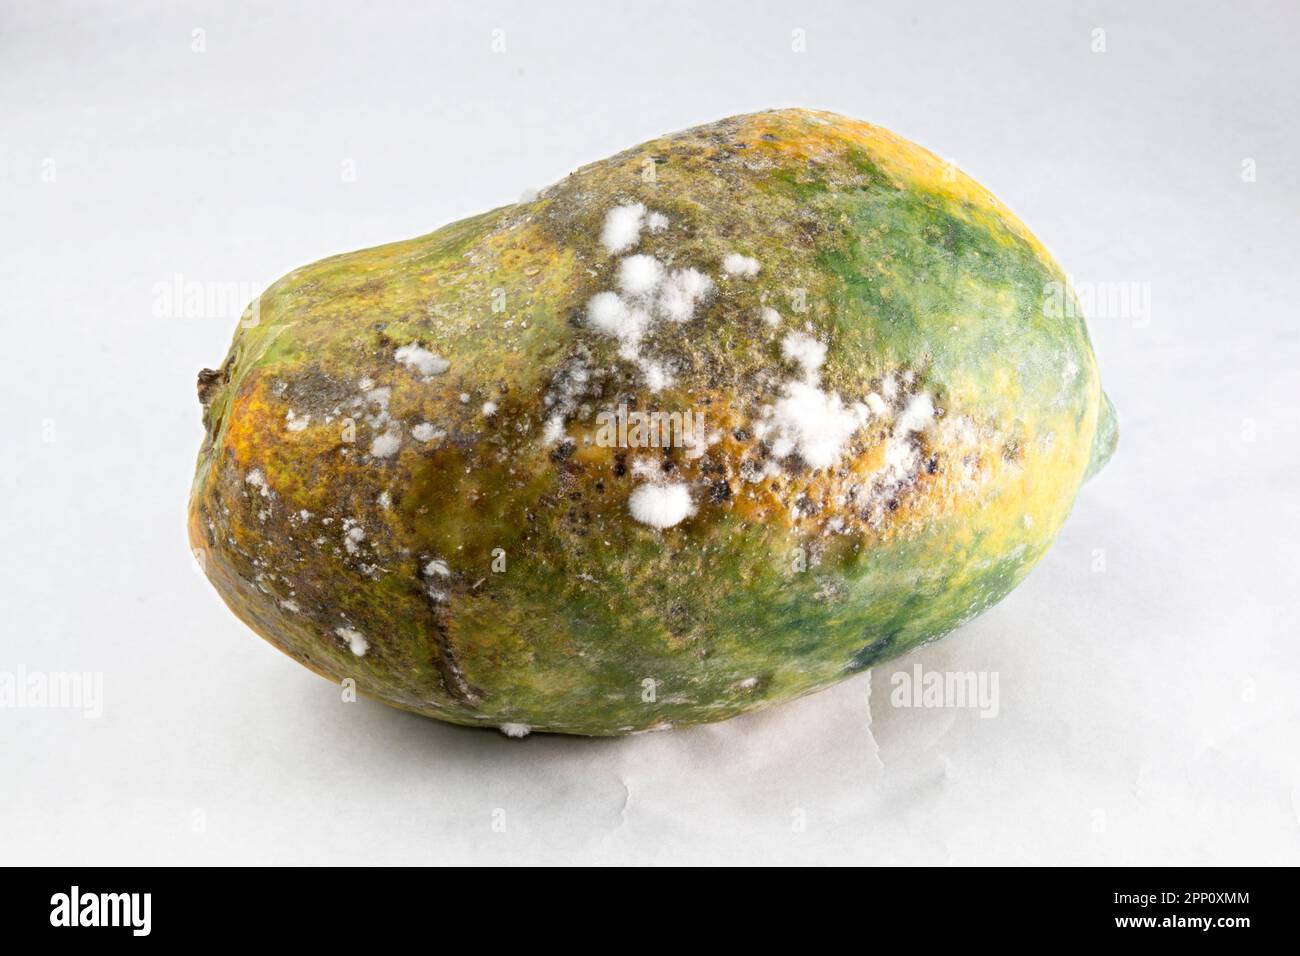 Rotten papaya with moldy fungus. fruit rotten have fungus and pathogen on white background. Stock Photo